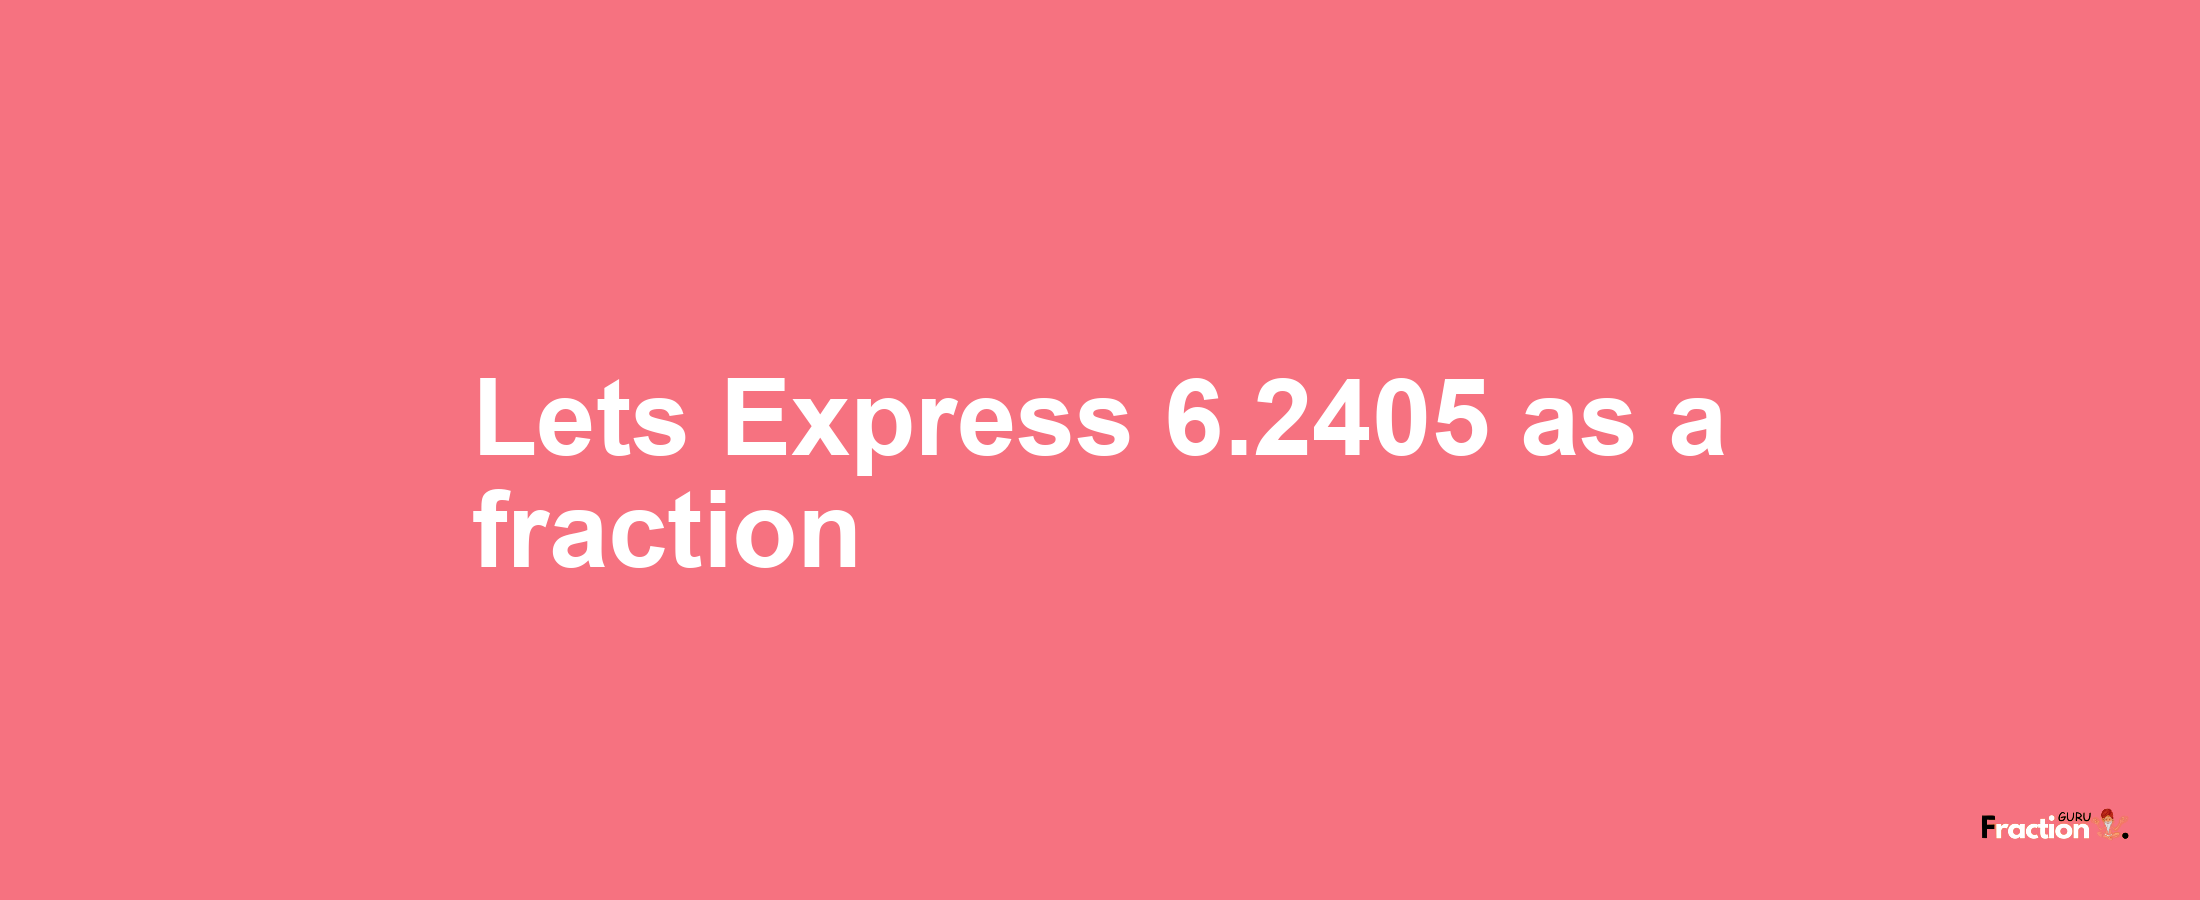 Lets Express 6.2405 as afraction